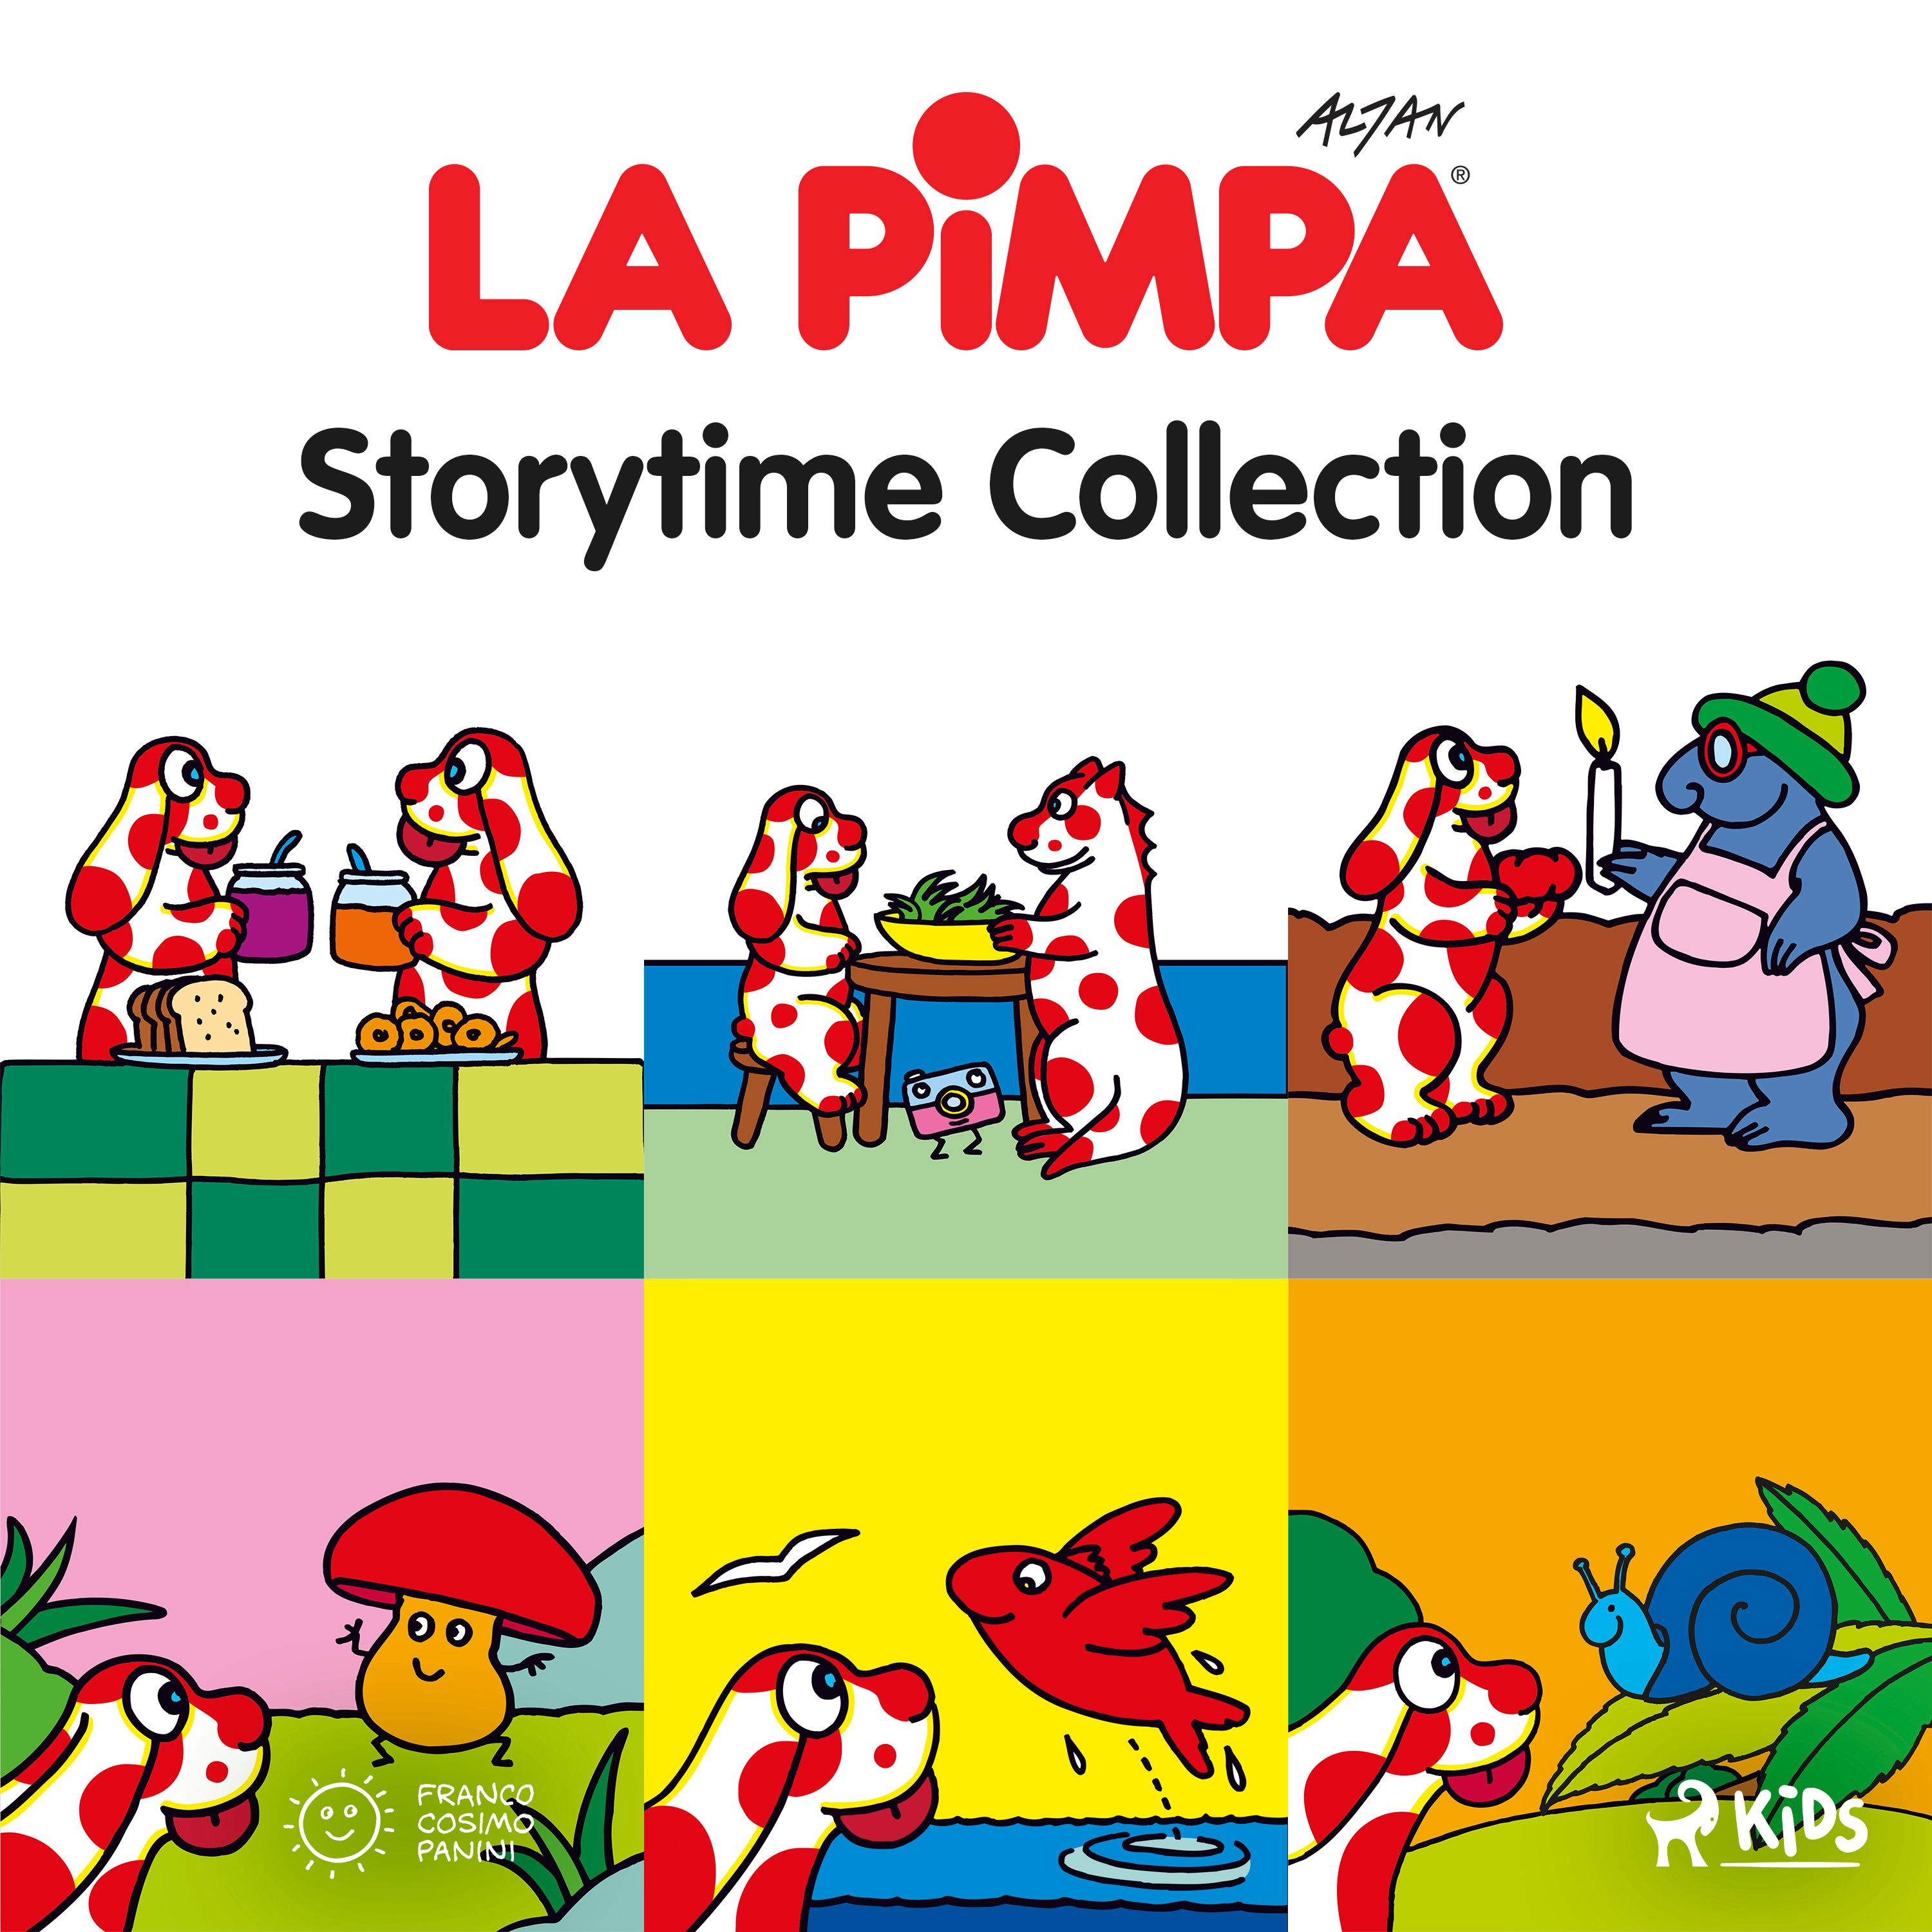 La Pimpa - Storytime Collection, audiobook by Altan